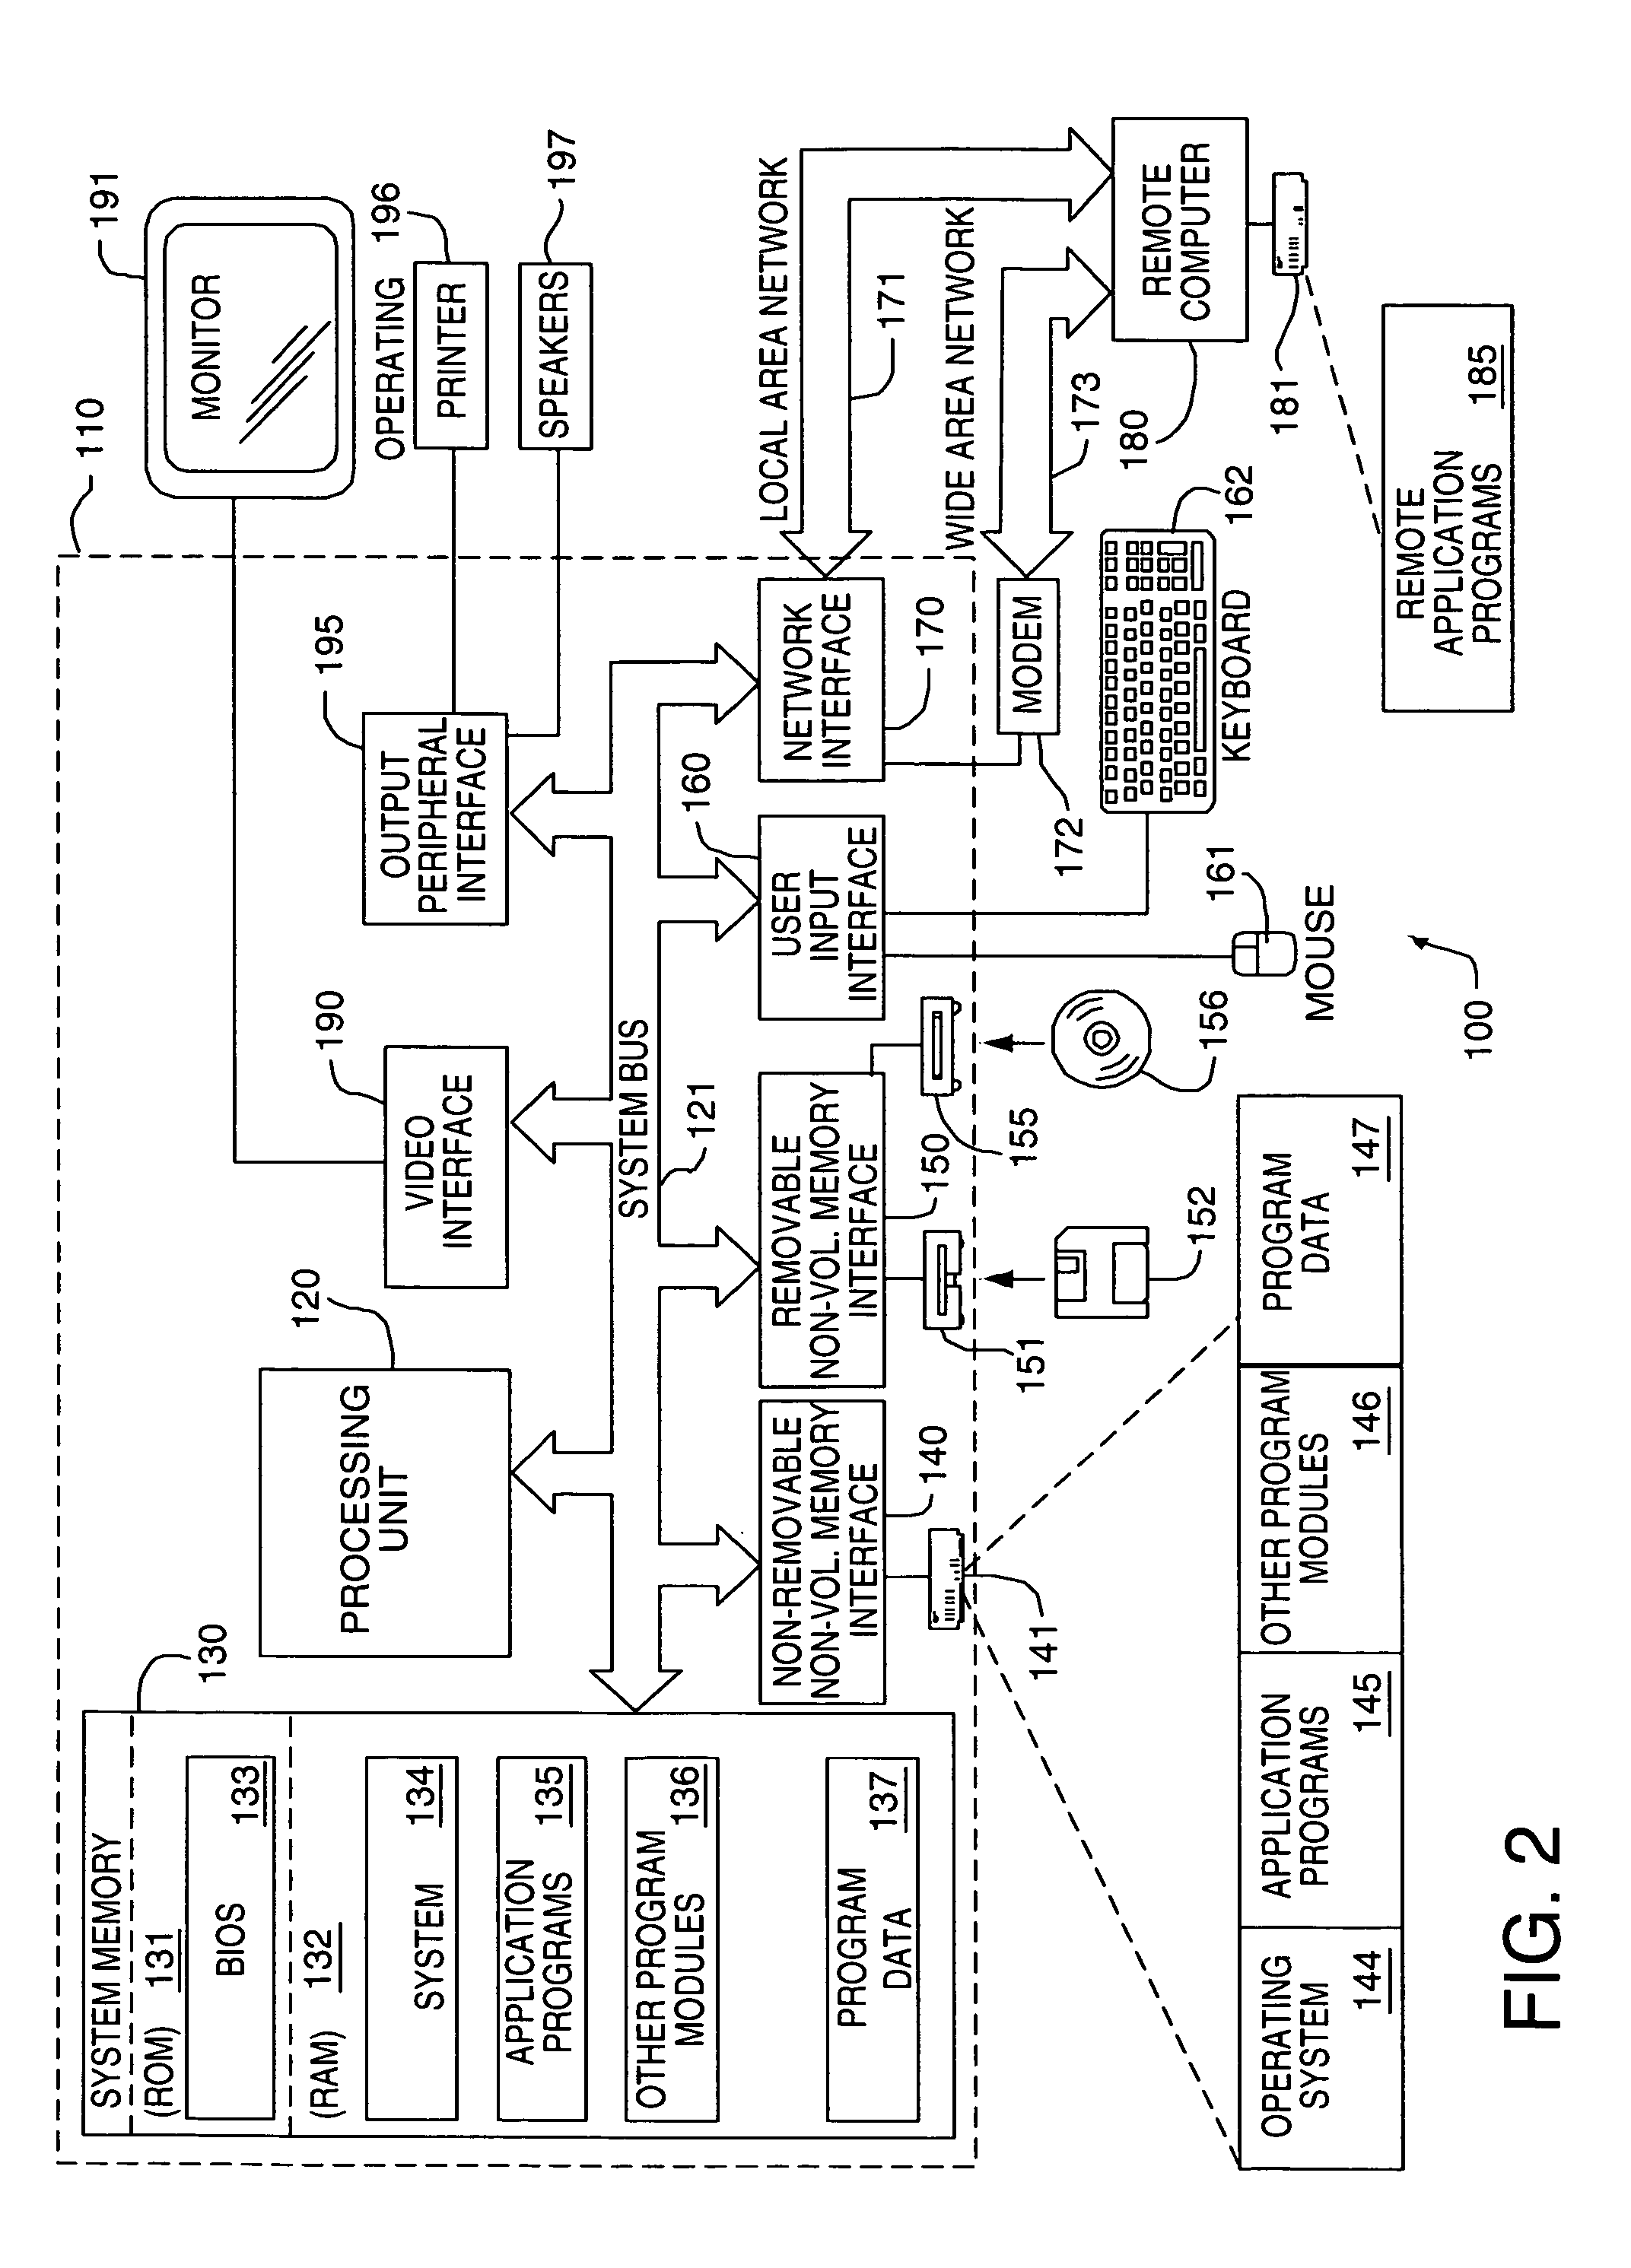 System and method for selection of media items